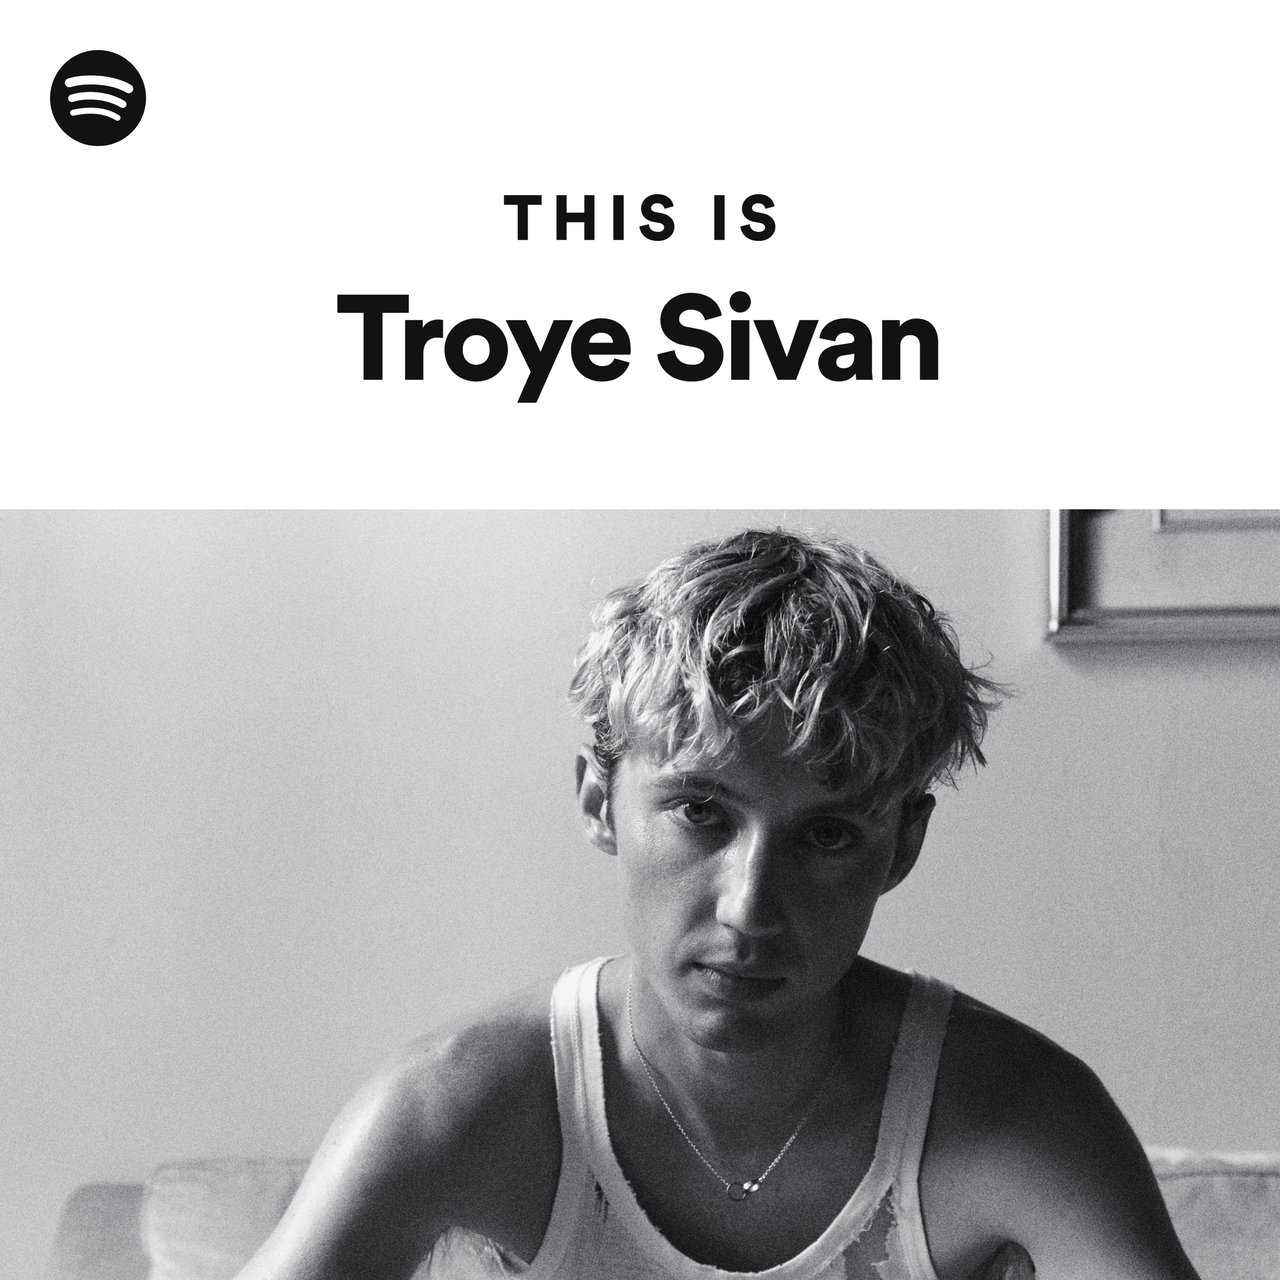 This Is Troye Sivan